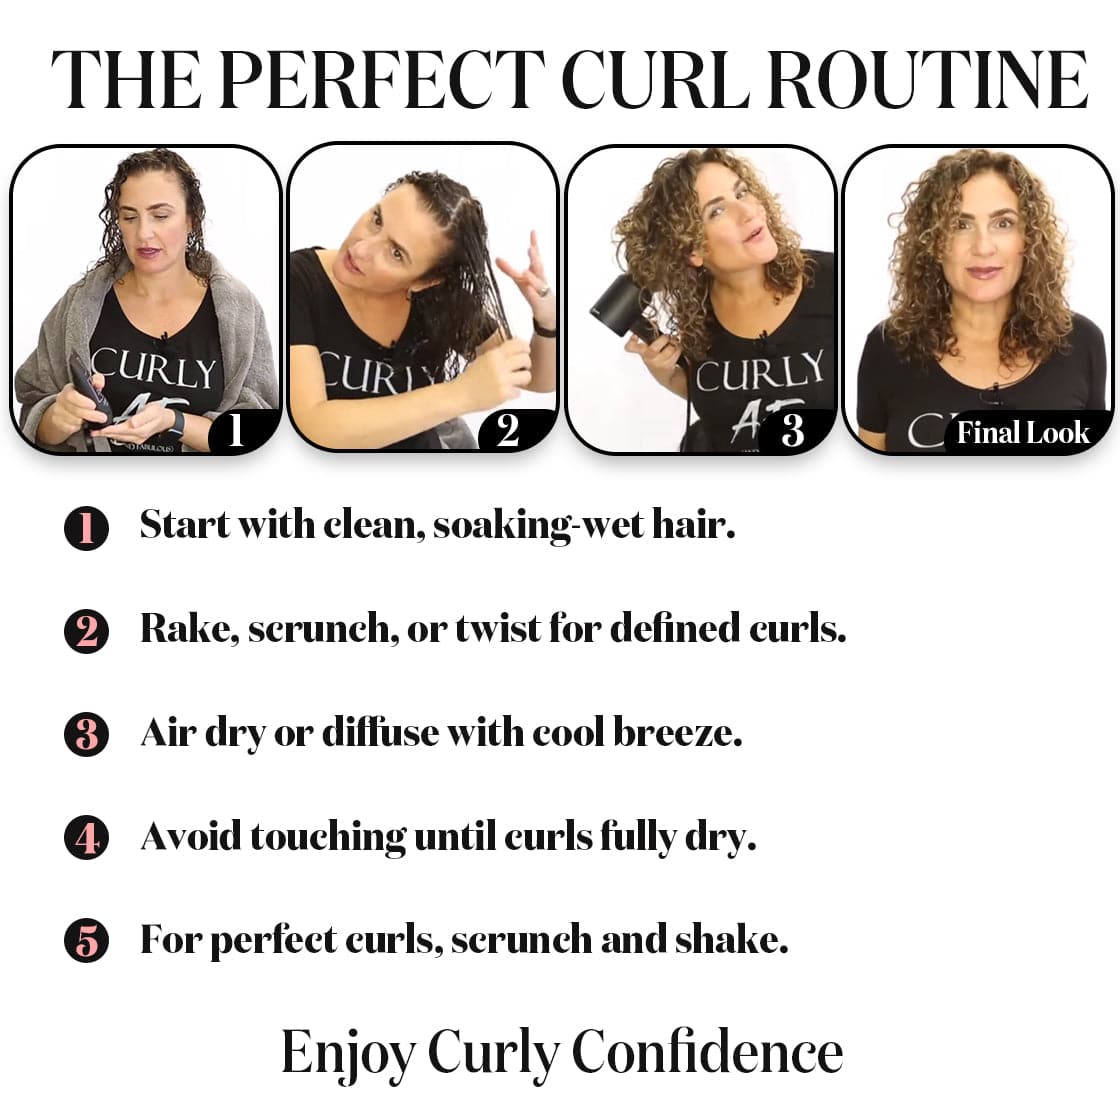 Controlled Chaos - 1 OZ Free Curly Hair Product Sample